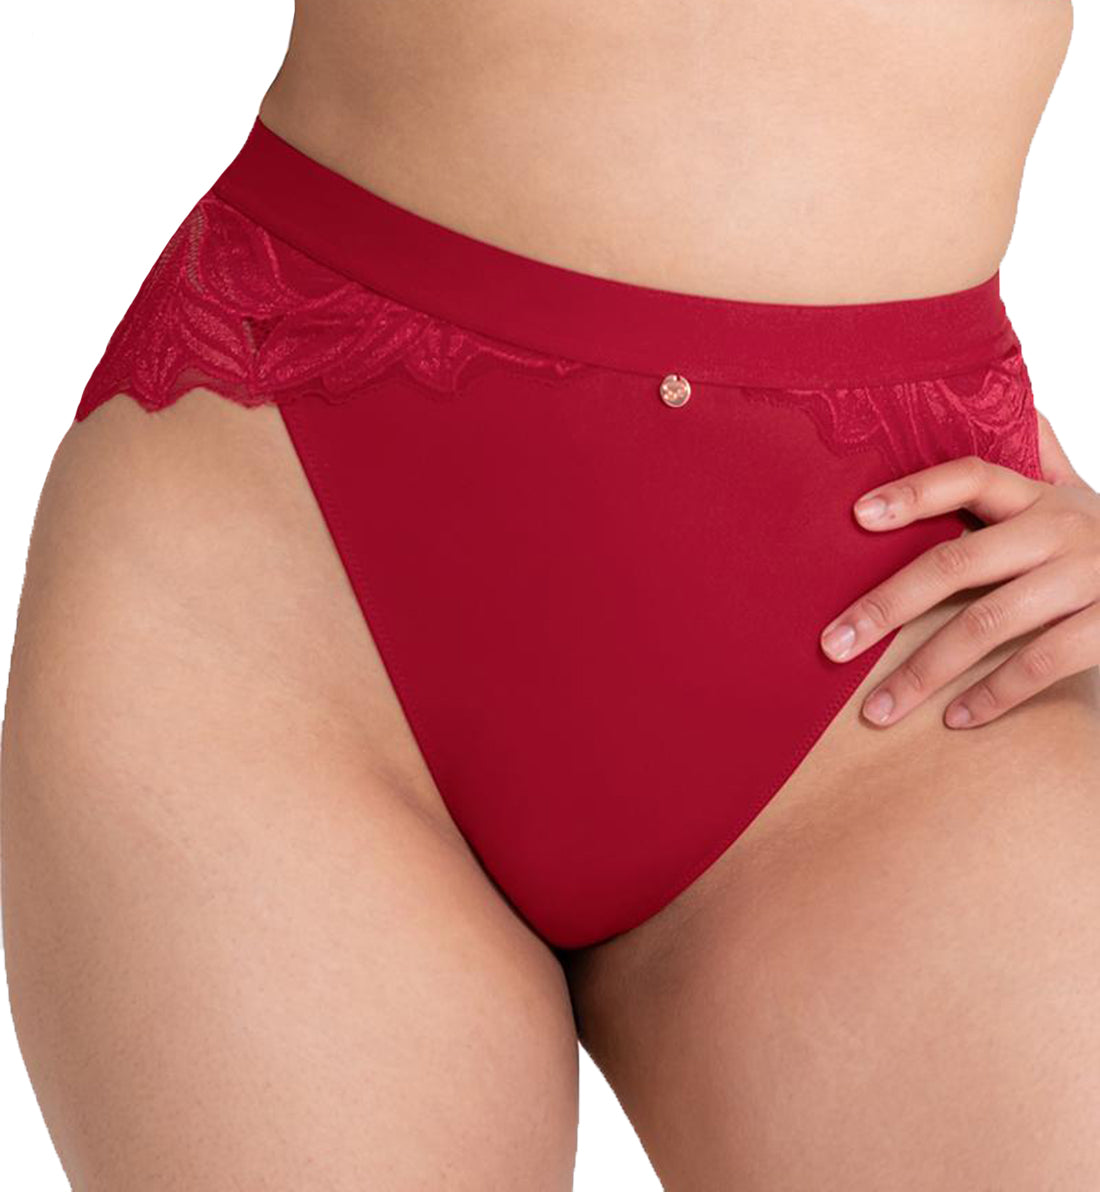 Scantilly by Curvy Kate Indulgence High Waist Brief (ST010208),Small,Red - Red,Small